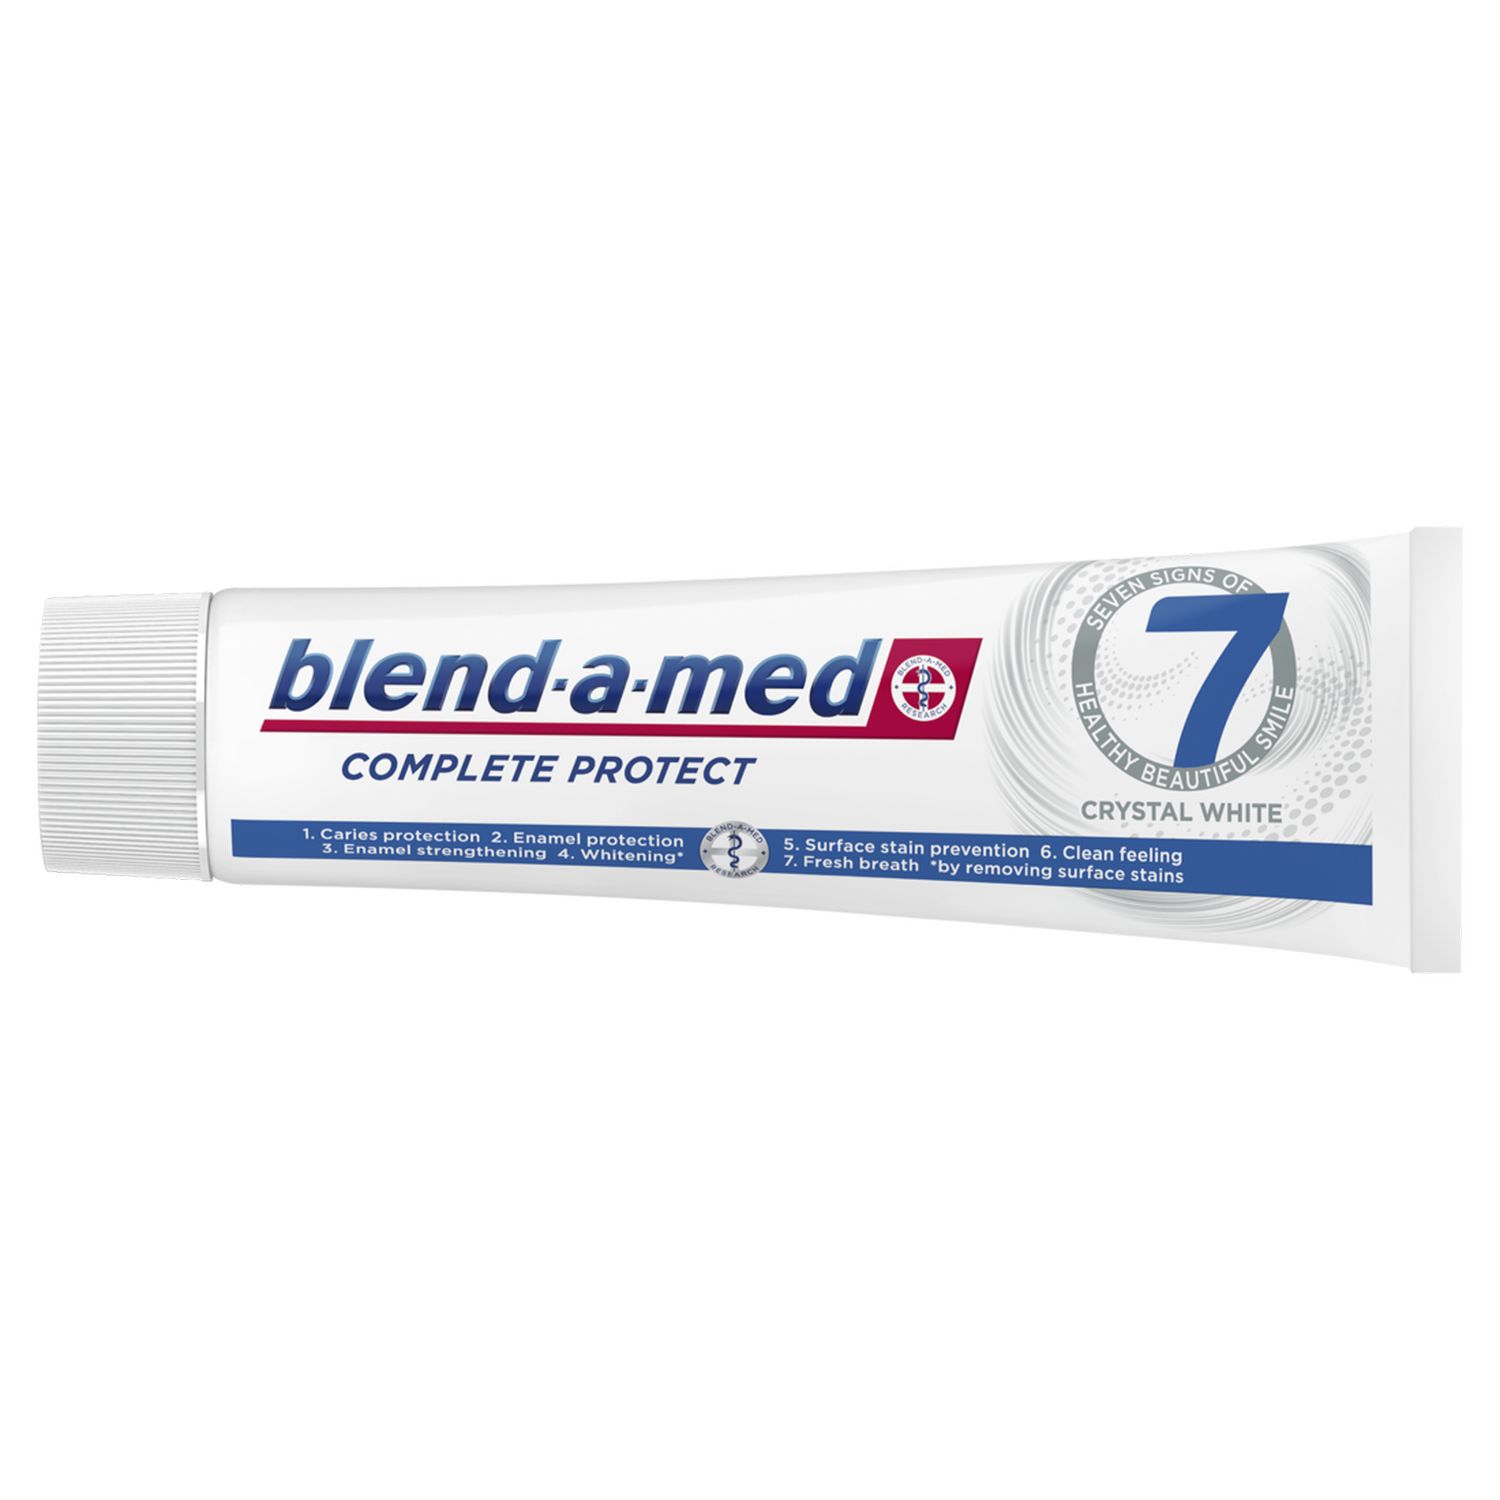 Зубна паста Blend-a-med Complete Protect 7 Кришталева білизна 100 мл - фото 2